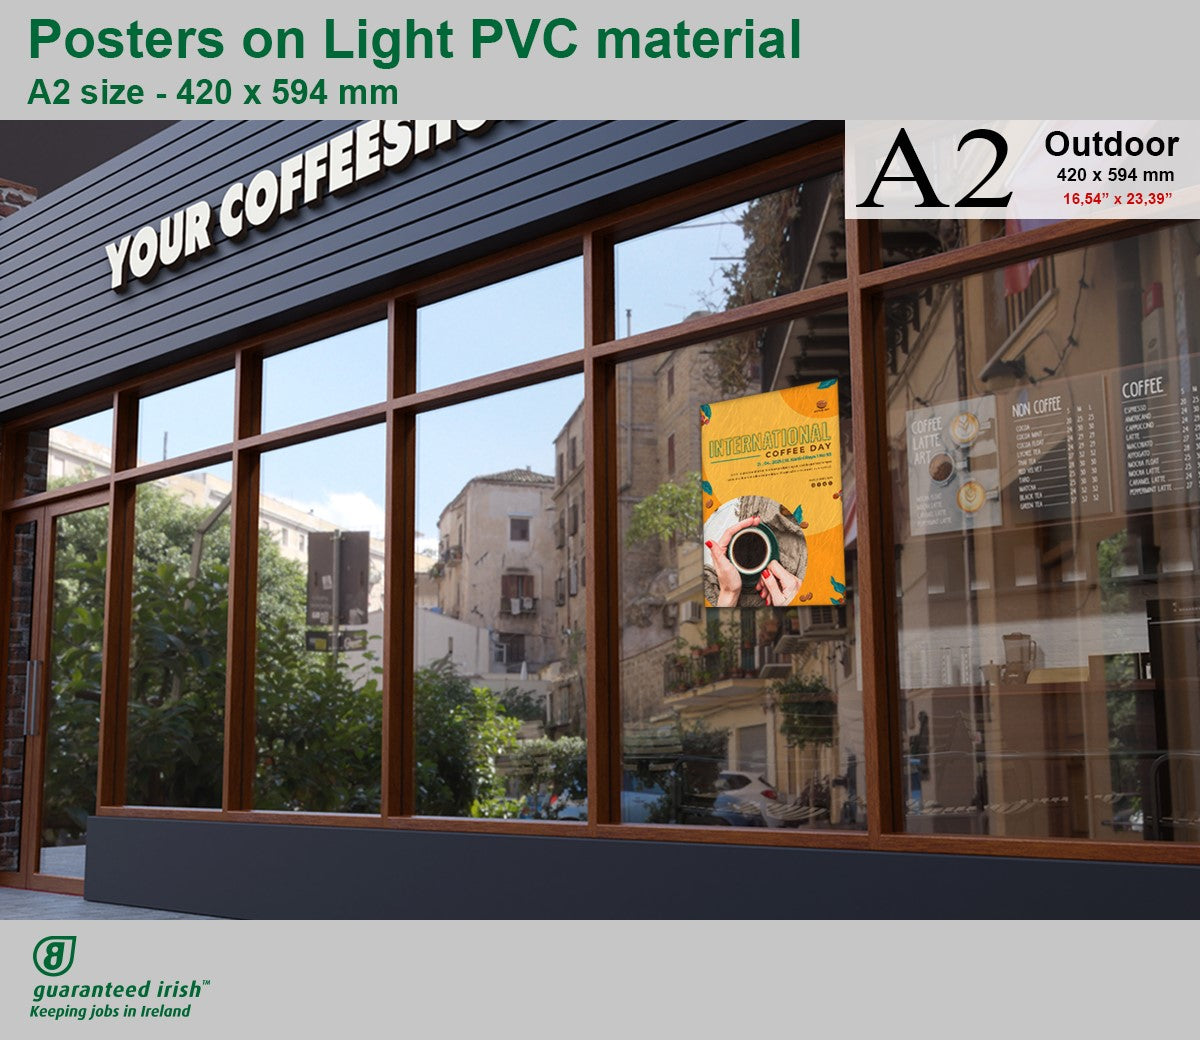 Posters on Light PVC Material - Outdoor A2